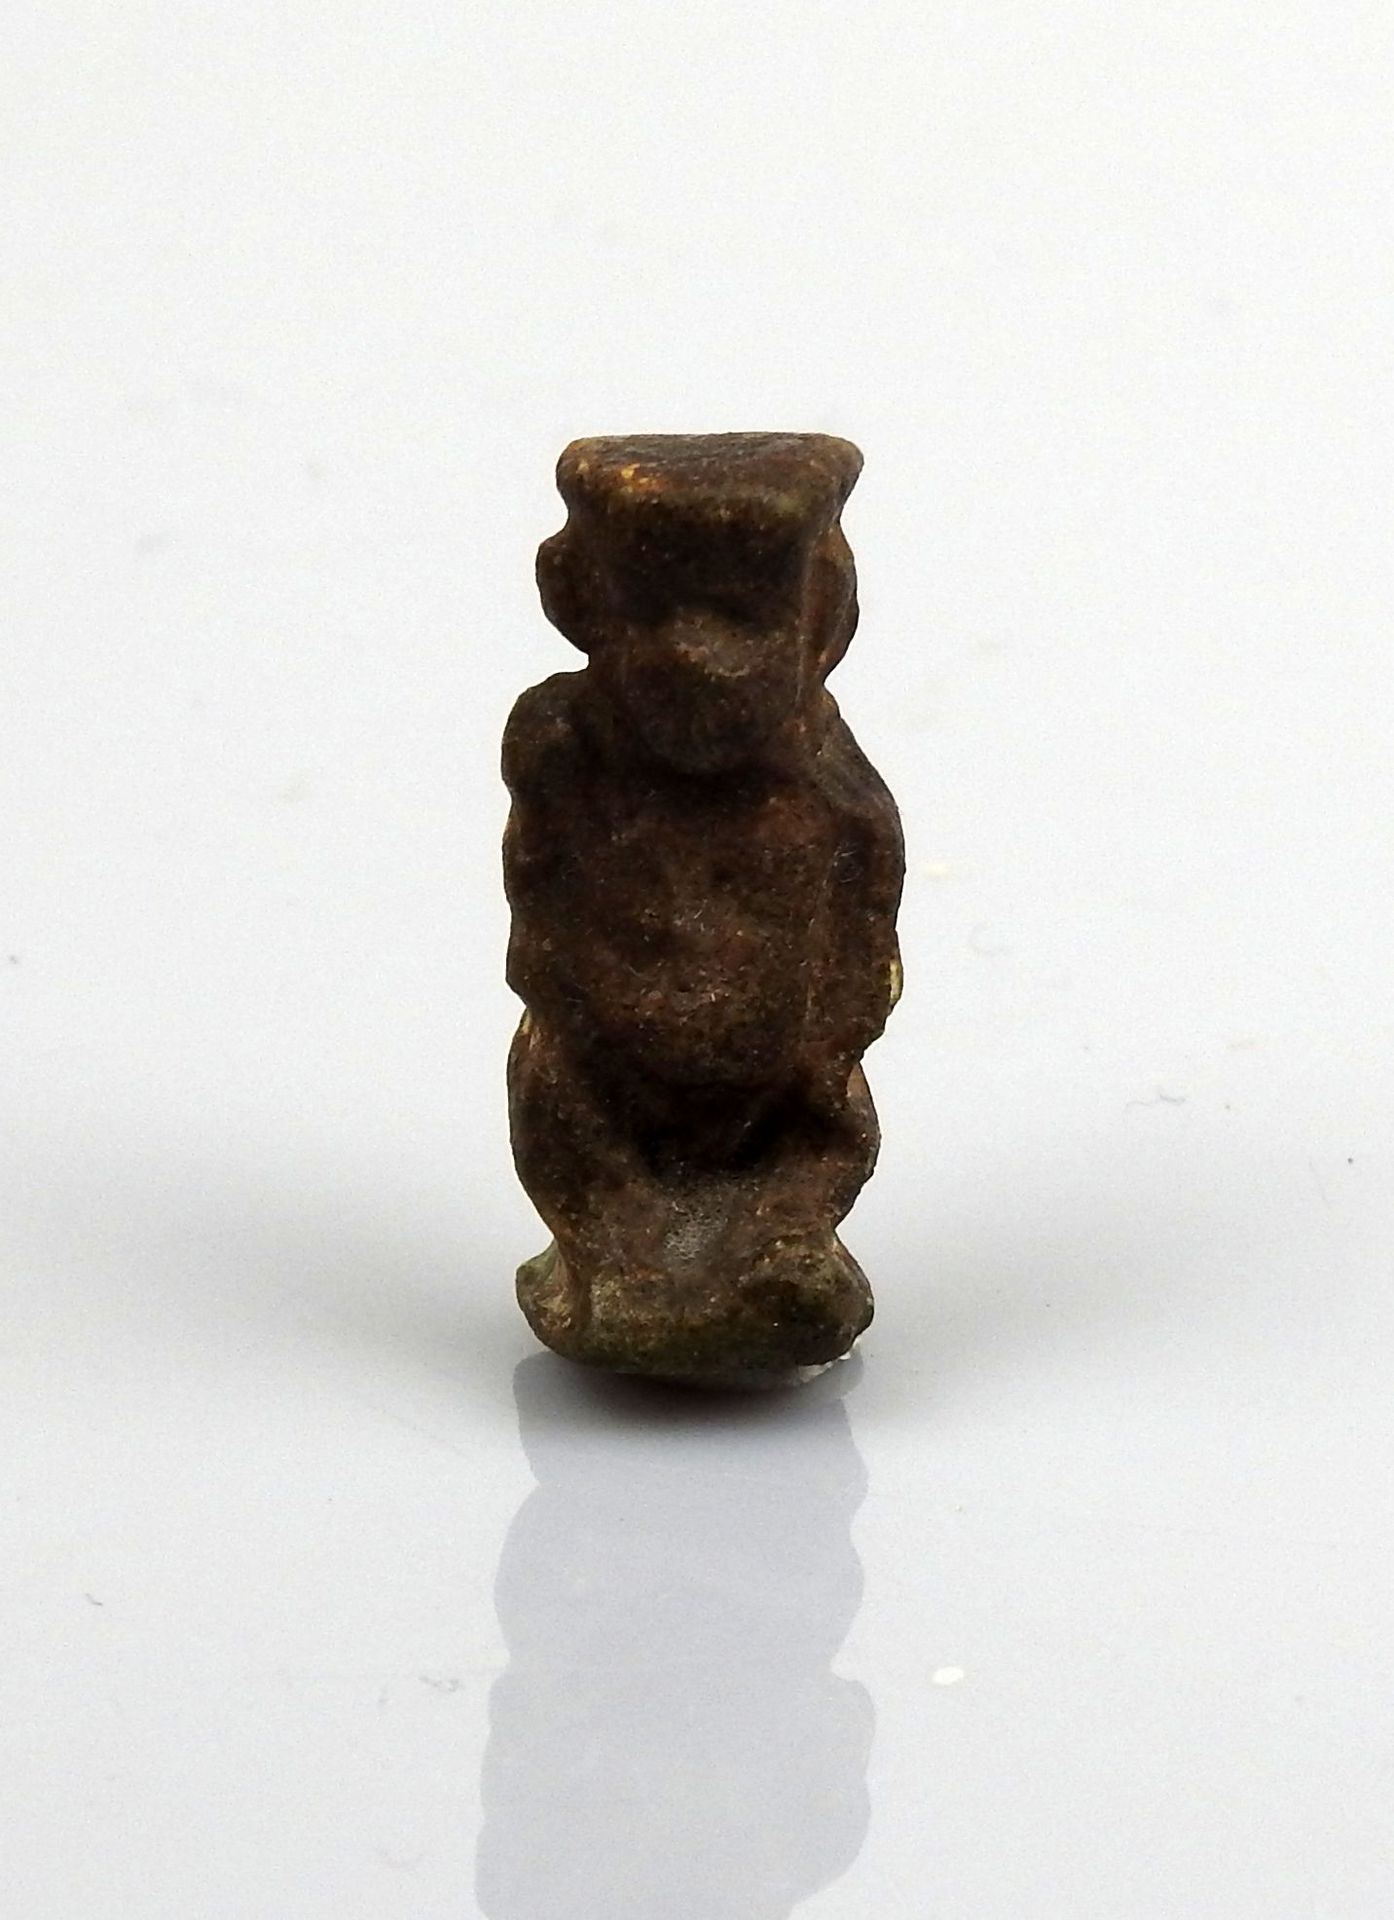 Null Amulet representing Bes

Frit 2.5 cm

Egypt Late Period XXVI-XXXth dynasty